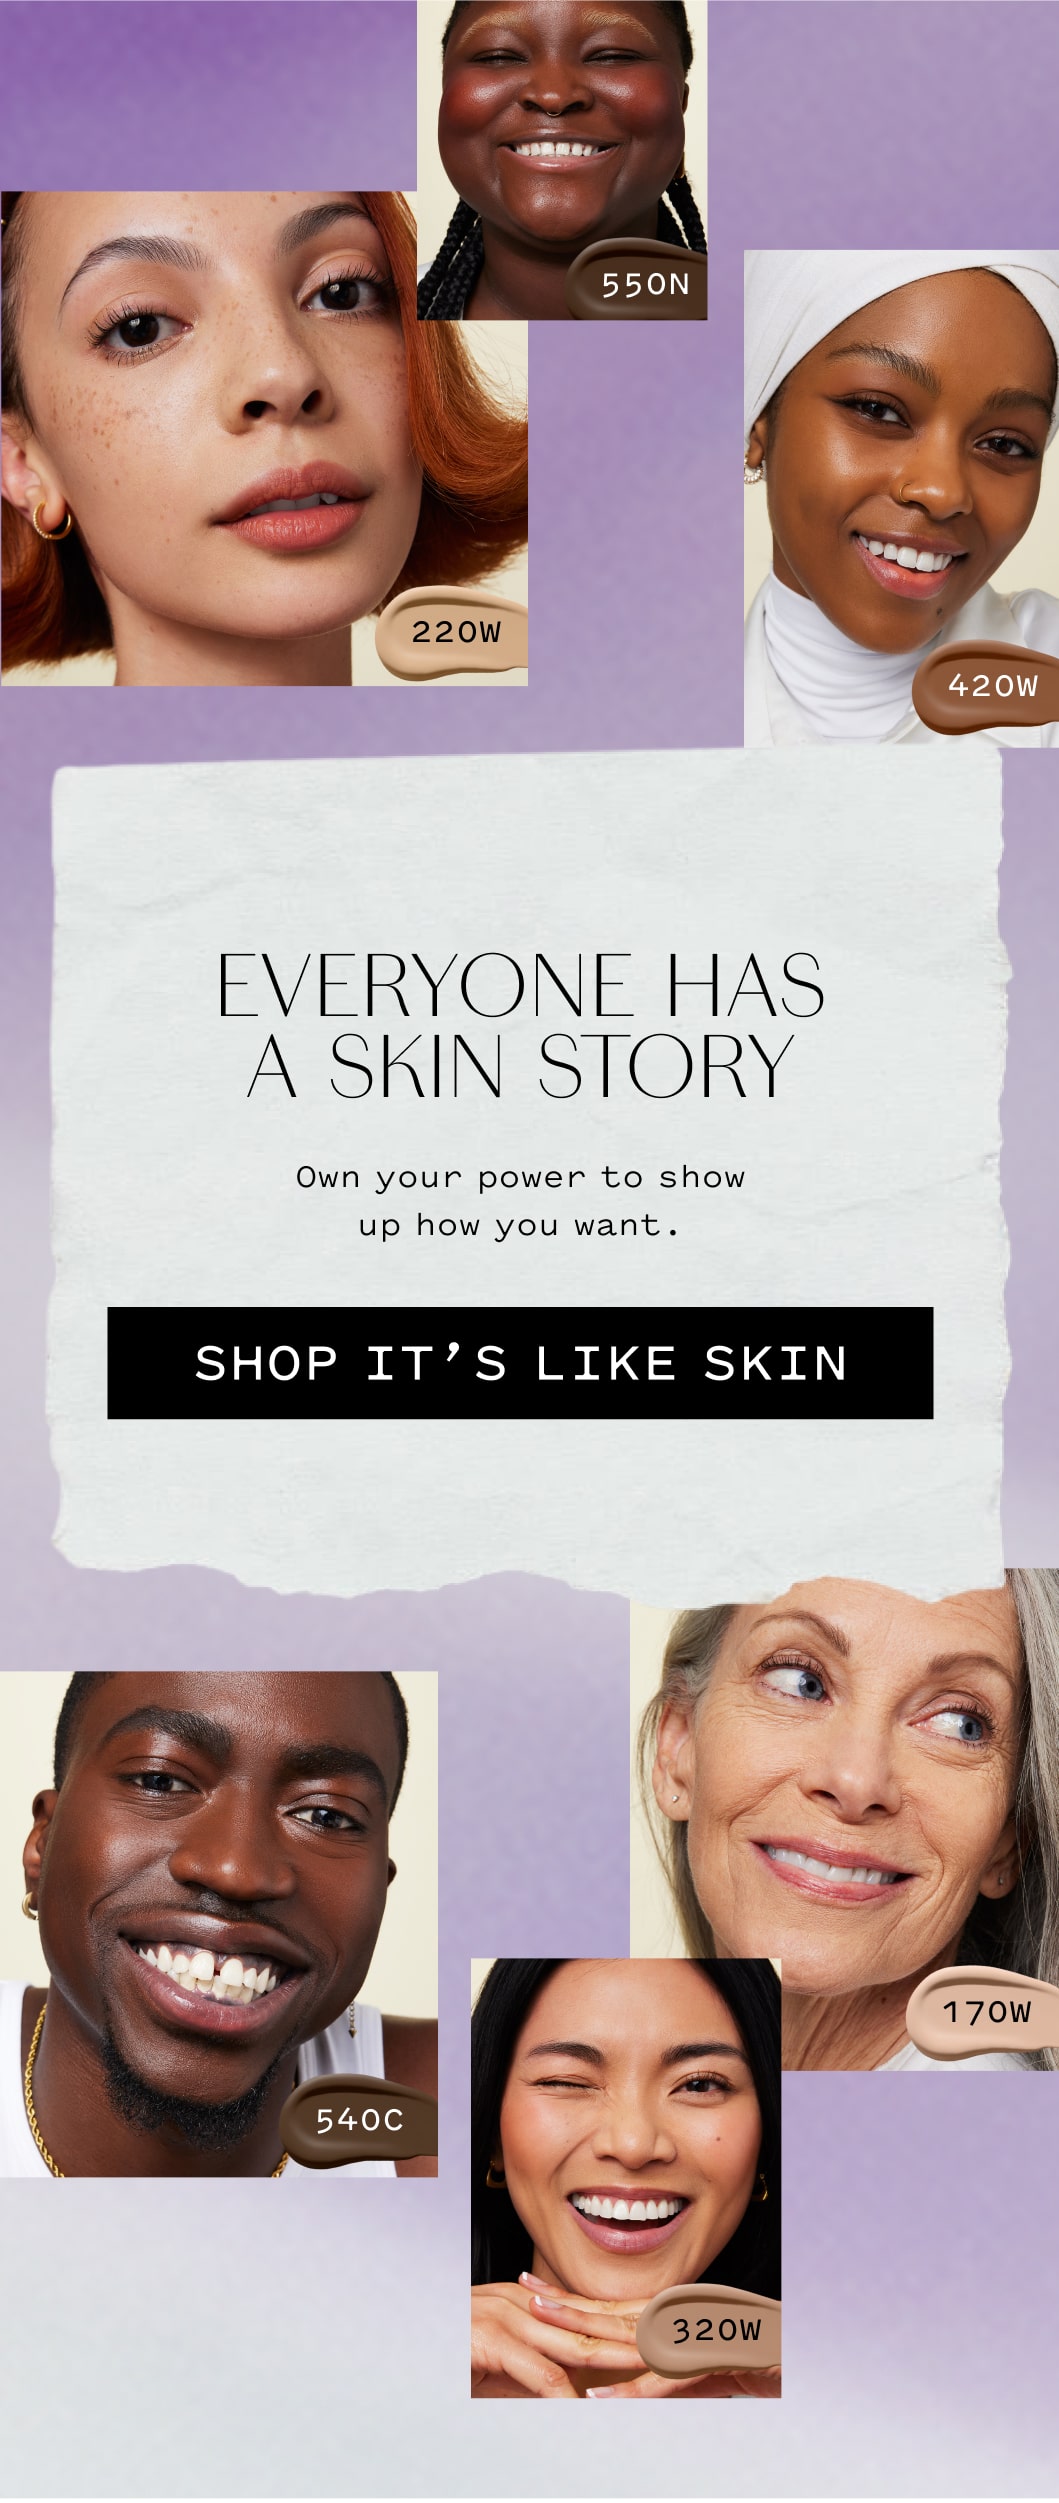 We all have a skin story that has opened our eyes to who we are and who we want to be.